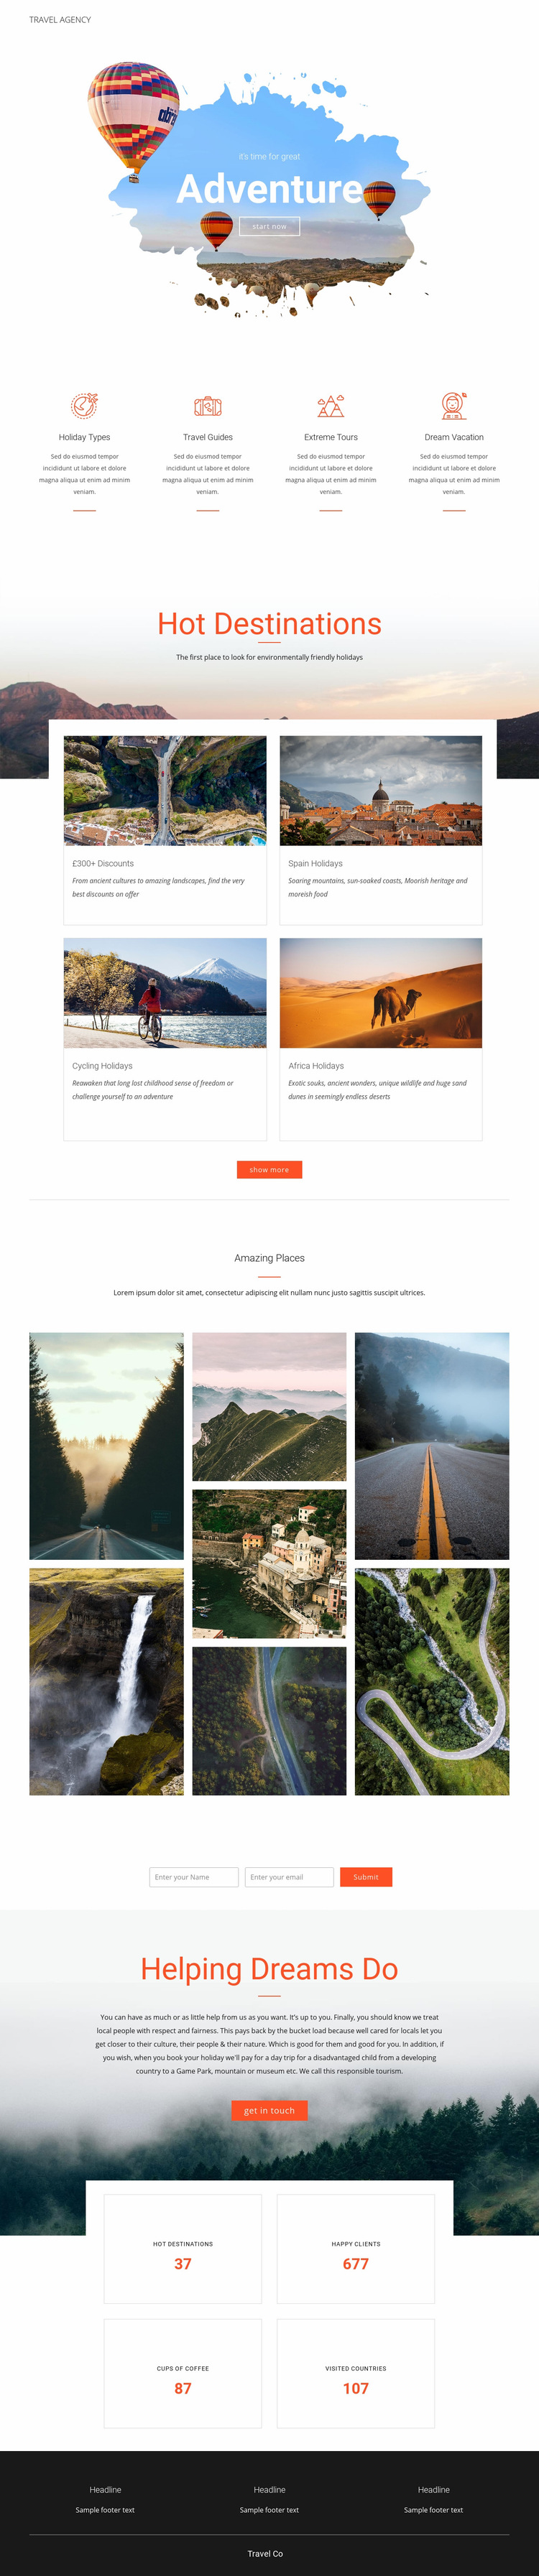 Adventure tours and travel Web Page Design